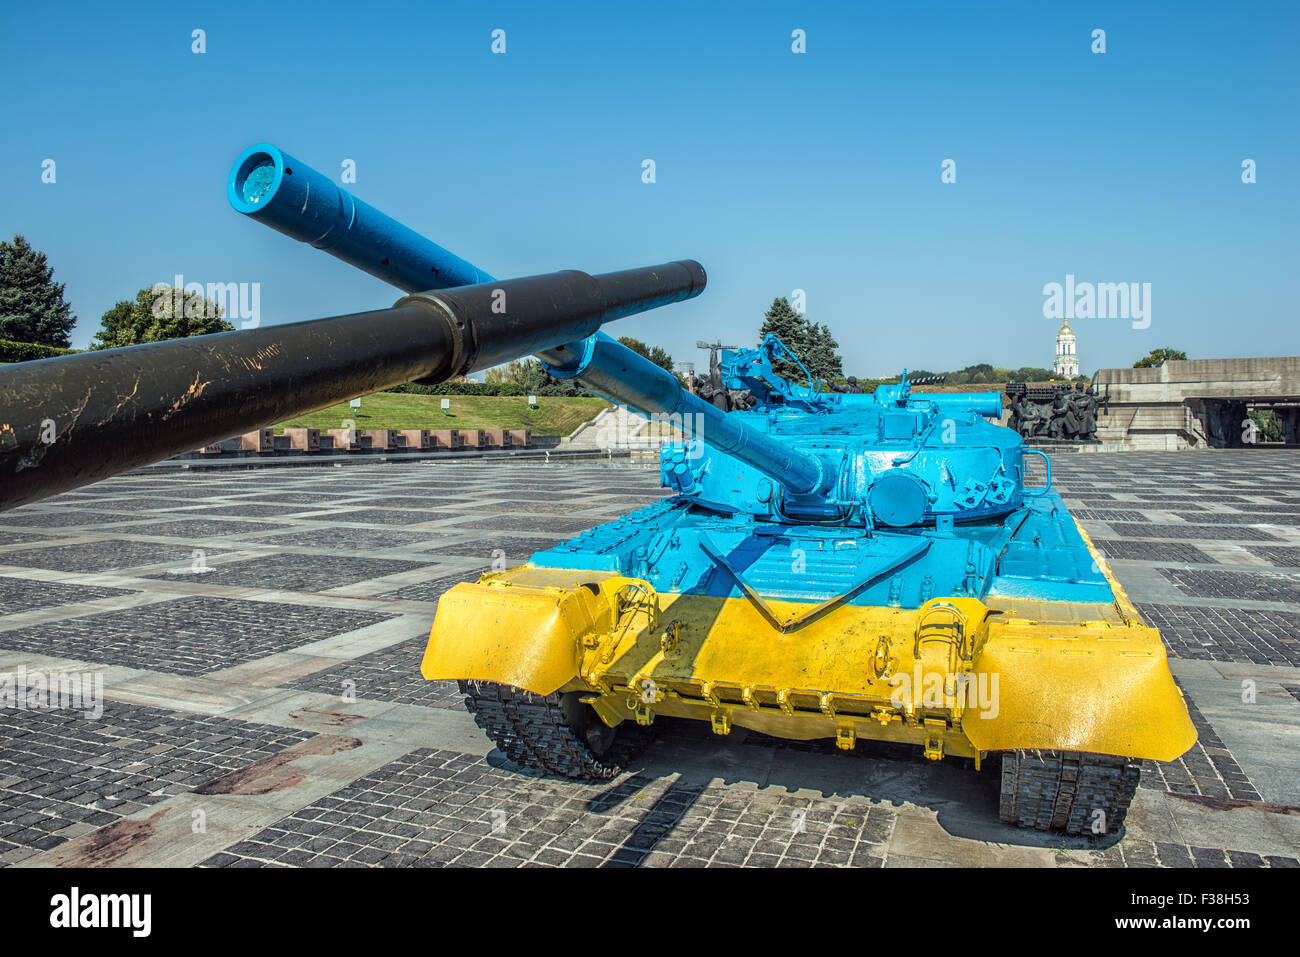 T-64 tank in Kiev near Mother Motherland statue after having been repainted in the colors of the flag of Ukraine Stock Photo